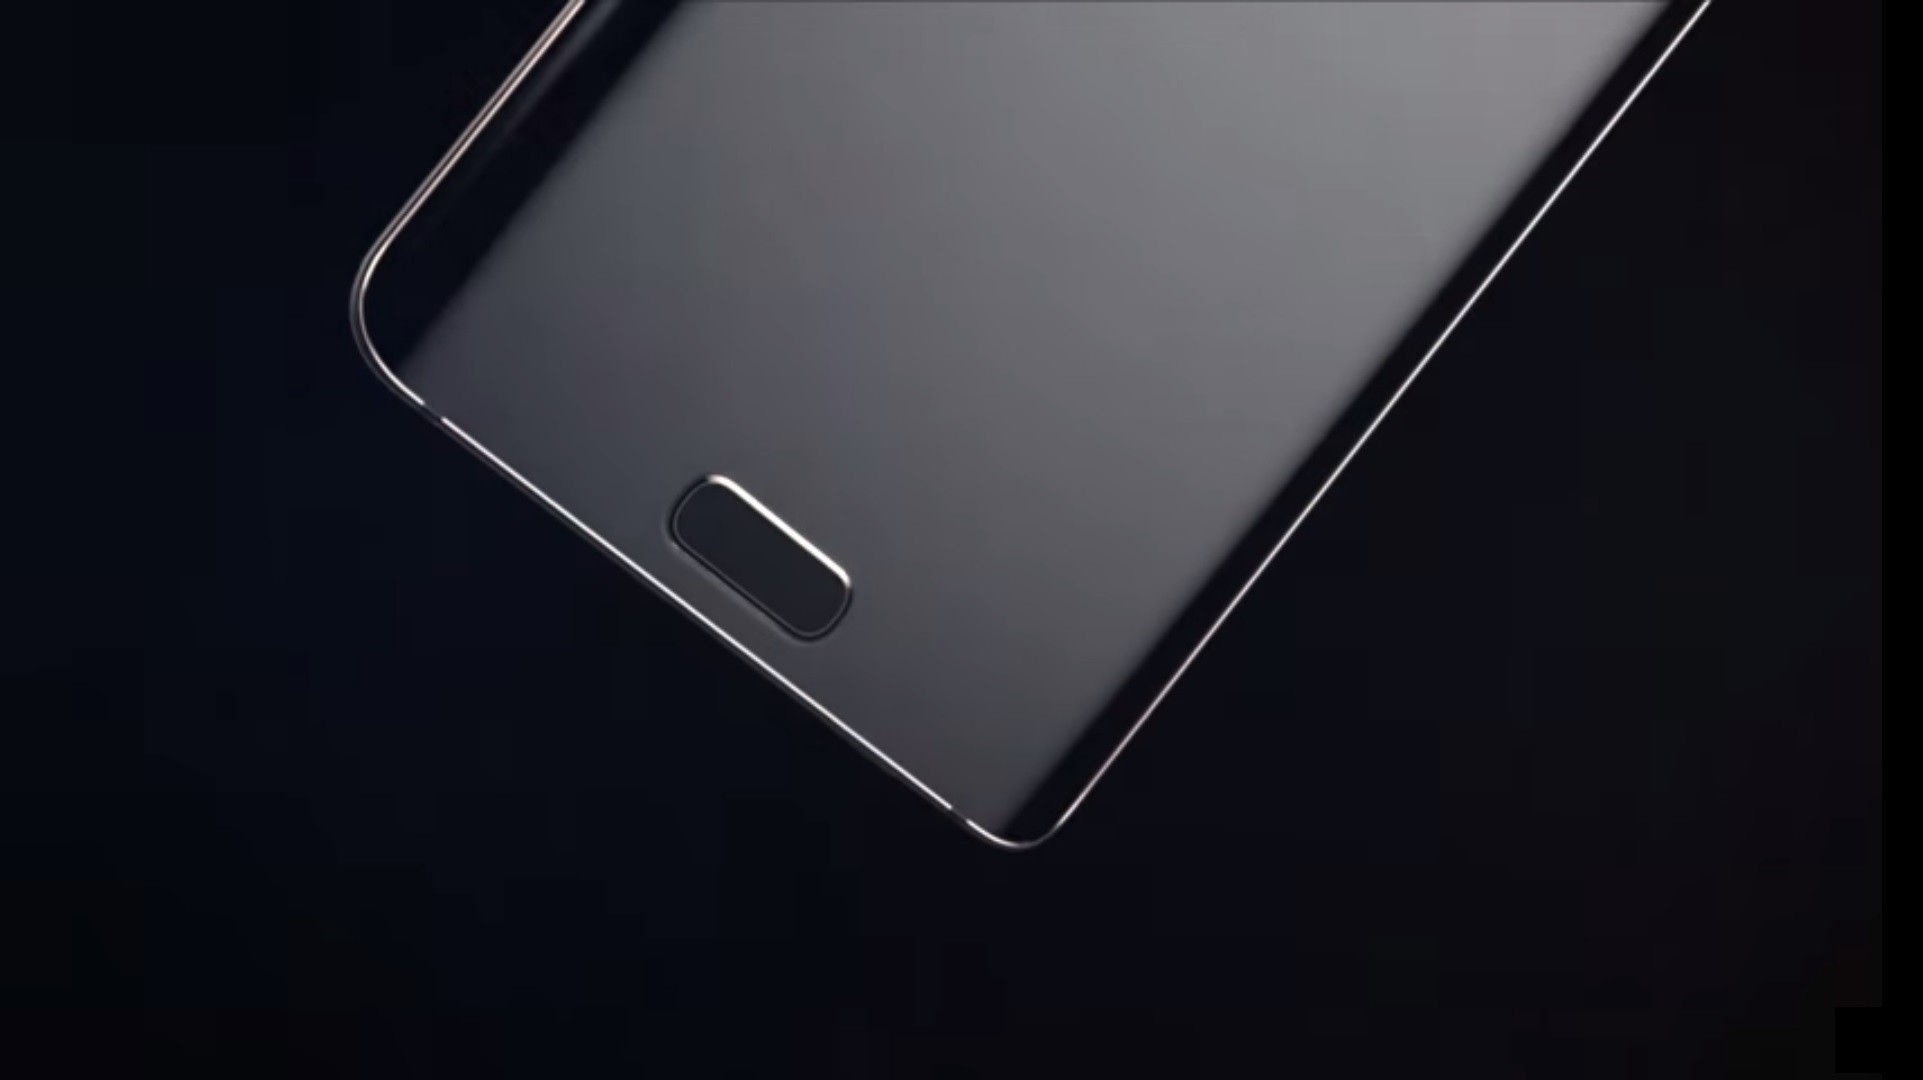 New-Samsung-Galaxy-Note-5-Edge-Concept-Looks-Sleek-and-Shiny-481603-6